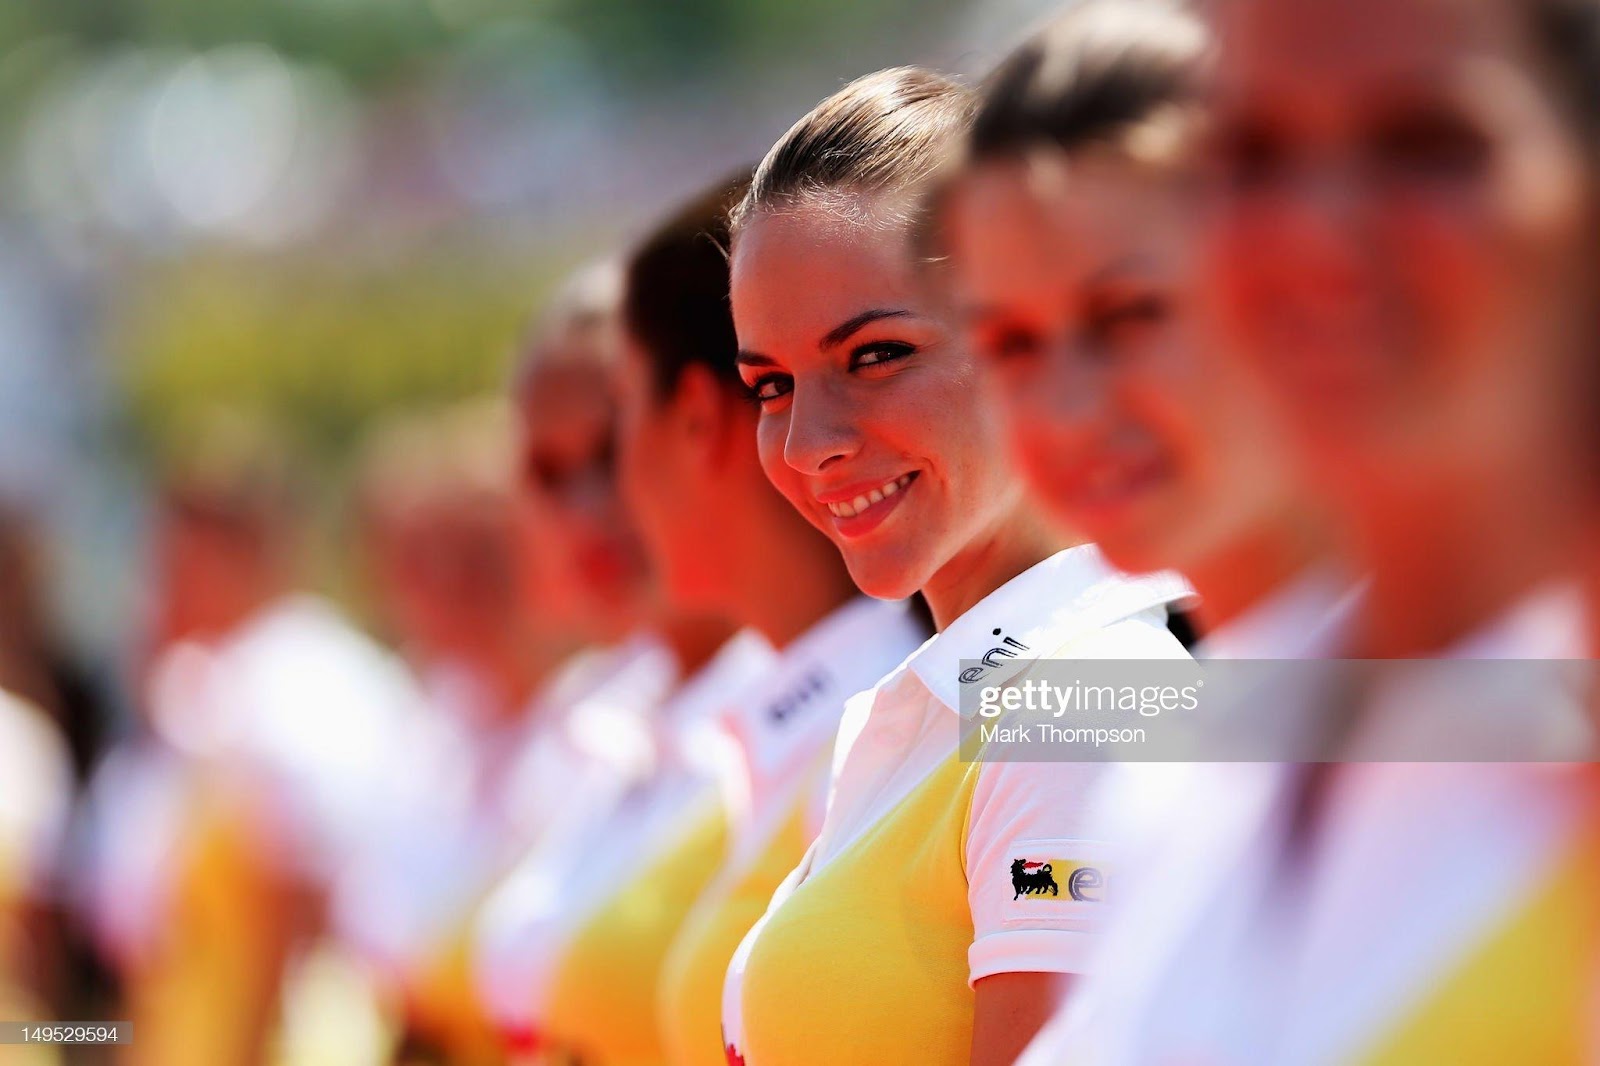 D:\Documenti\posts\posts\Women and motorsport\foto\Getty e altre\Budapest\grid-girls-attend-the-drivers-parade-before-the-hungarian-formula-one-picture-id149529594.jpg